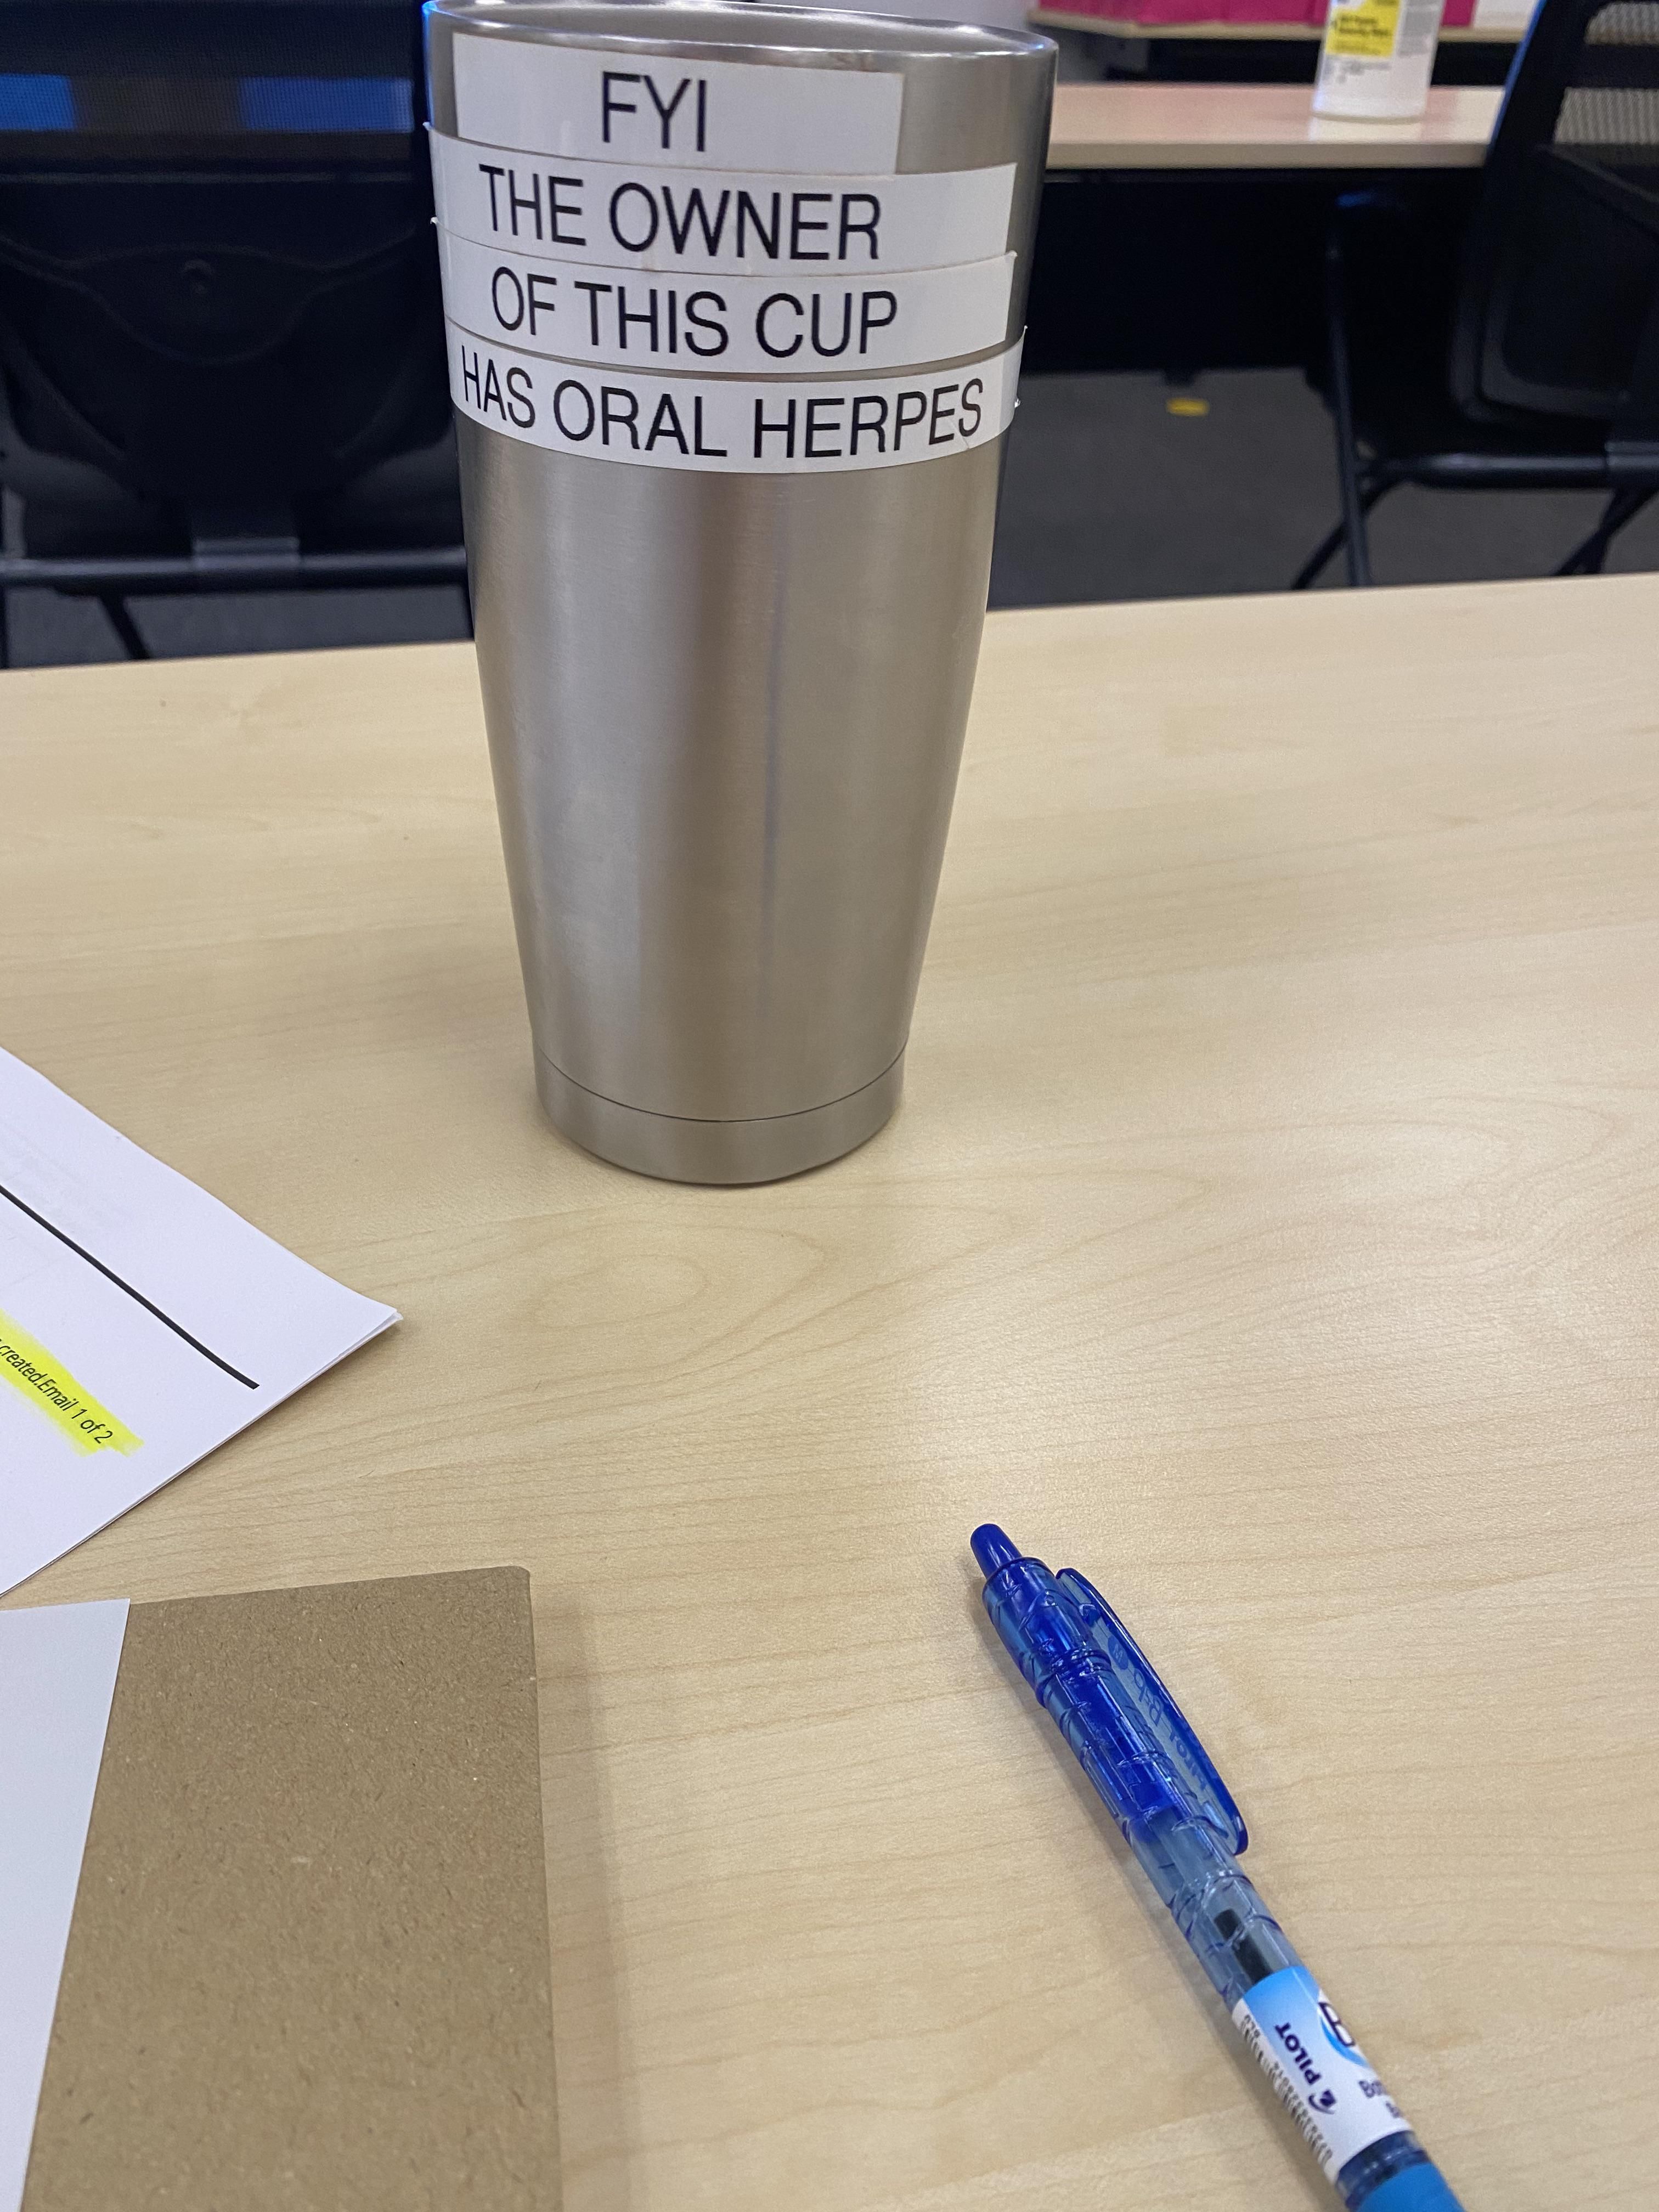 My dad said people at work wouldn’t stop using his personal cup, so this was his solution